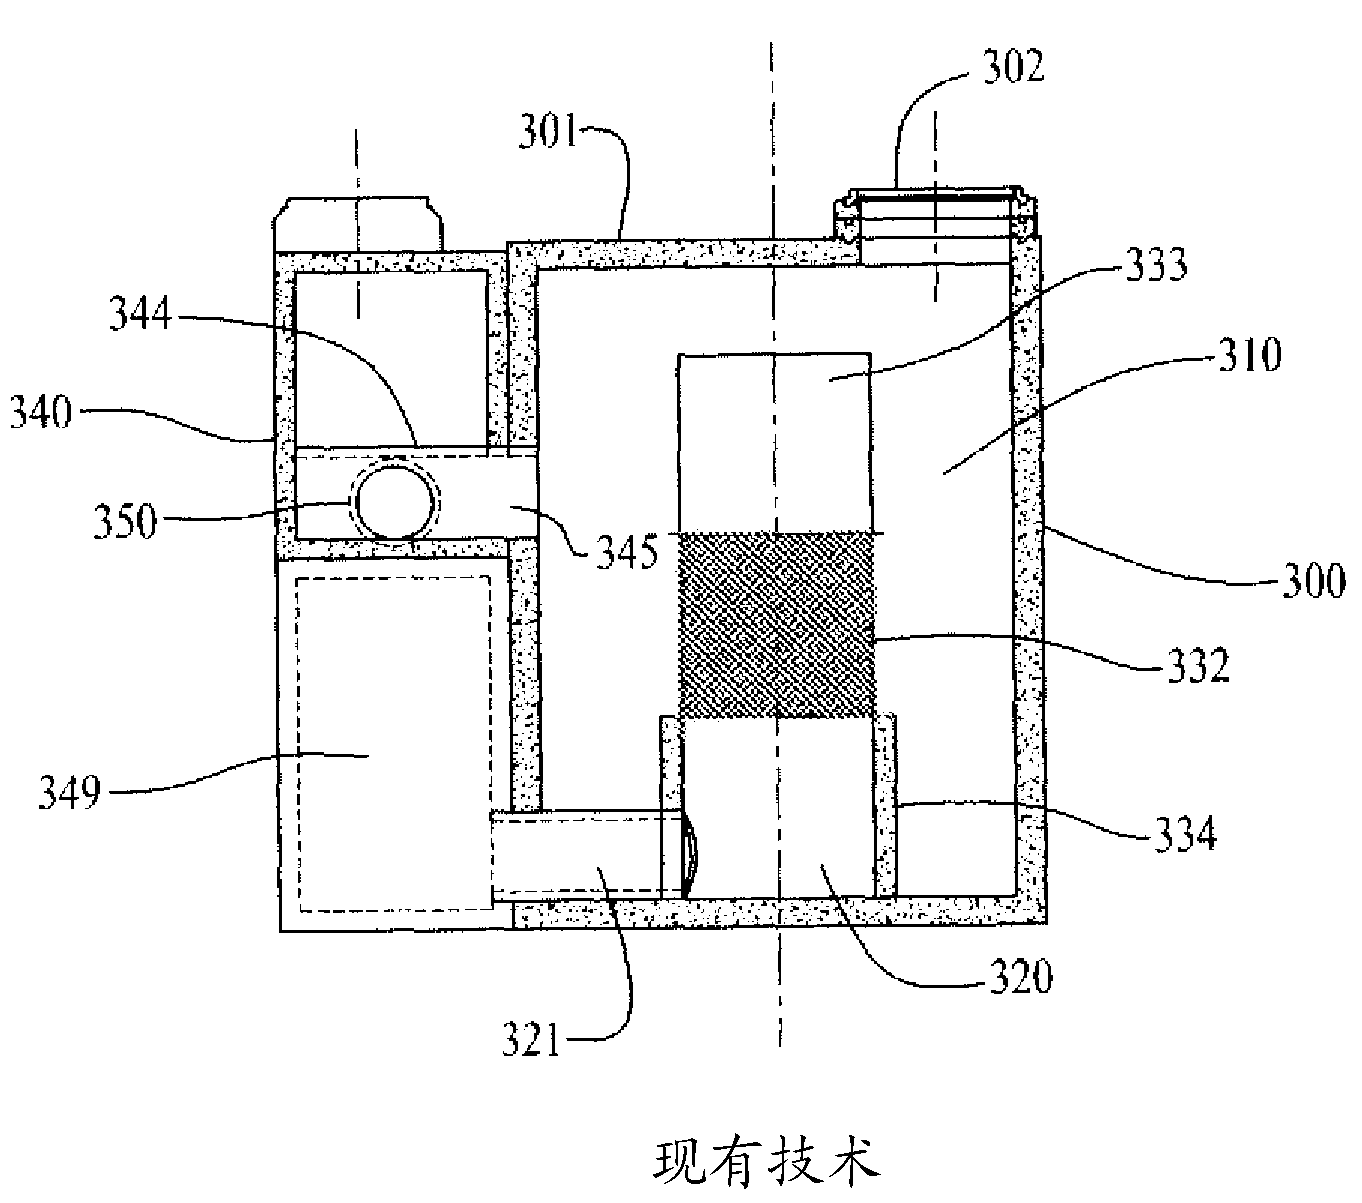 Fluid stream hydrodynamic separator with high flow bypass